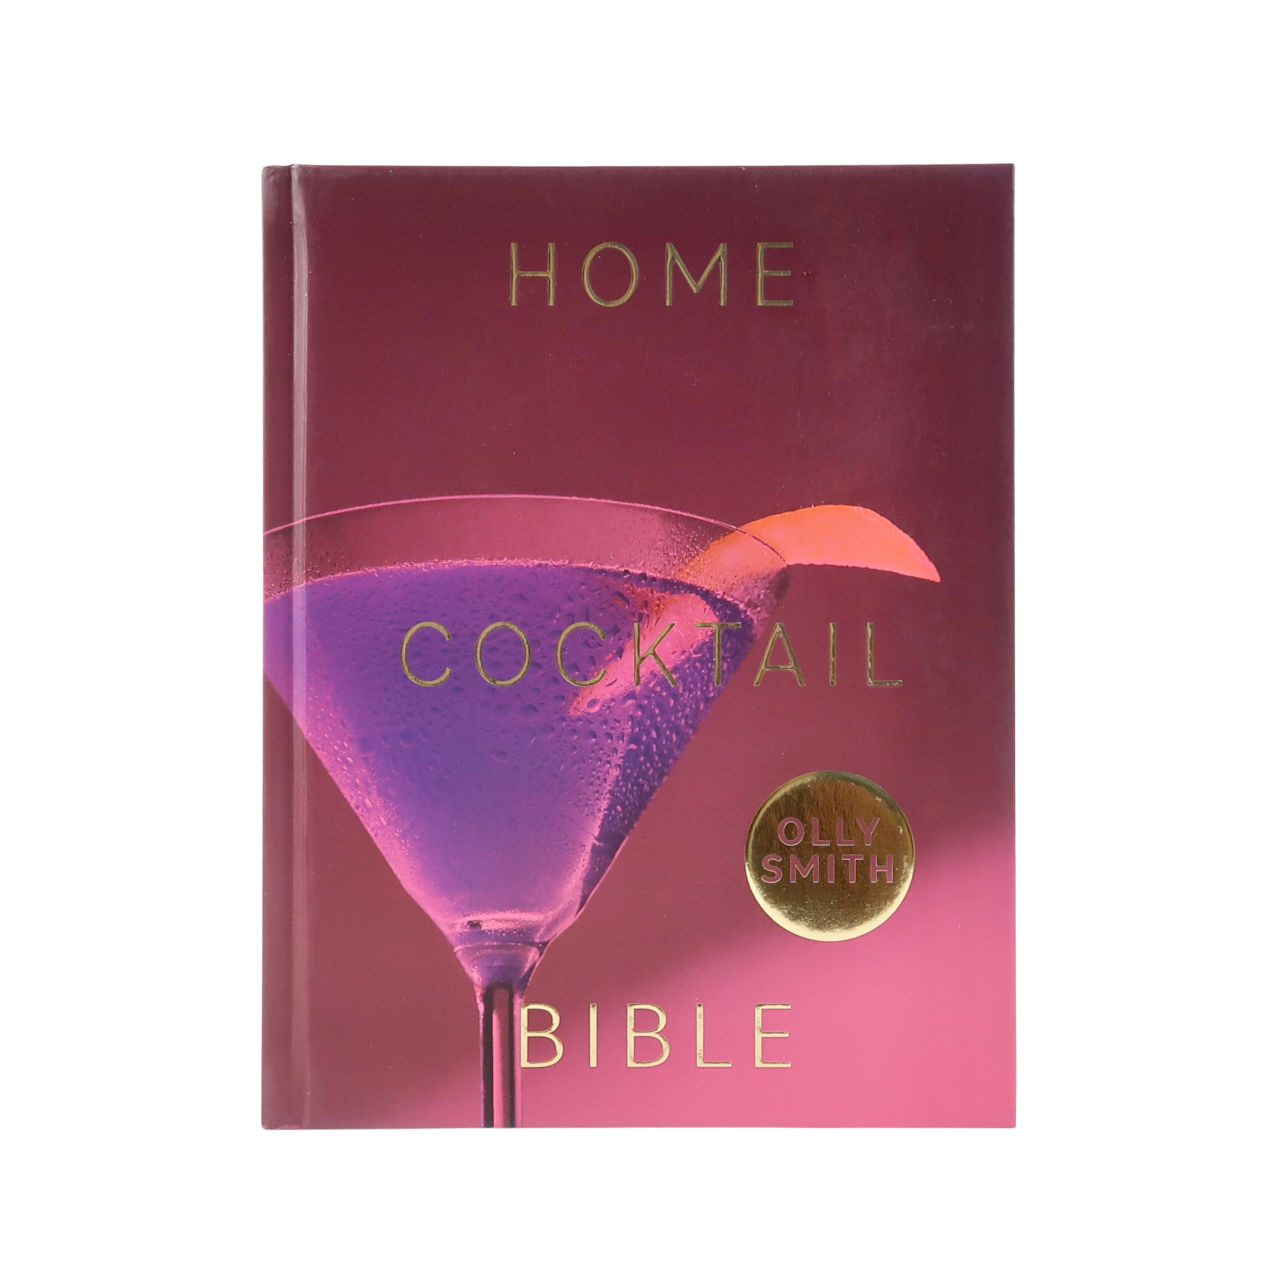 Quadrille Home Cocktail Bible - Olly Smith